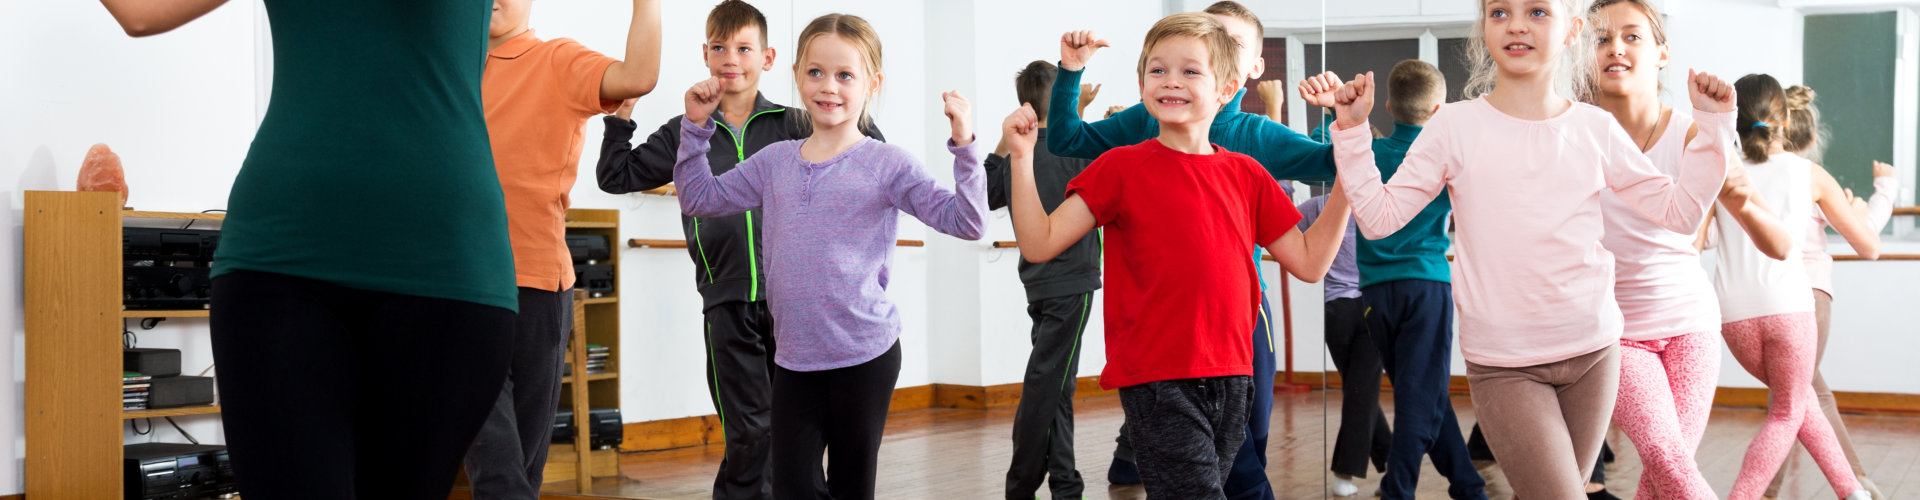 Happy little children studying modern style dance in class